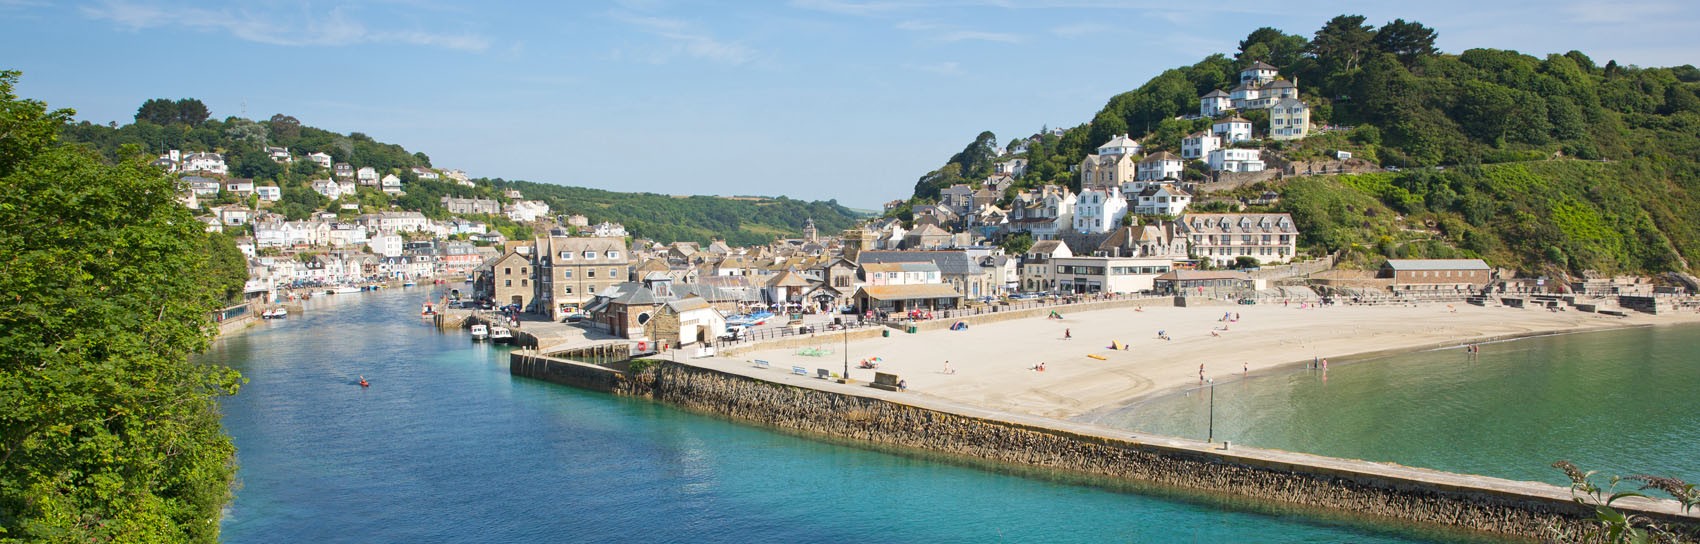 The town of Looe in Cornwall. Photograph by CHARLESY